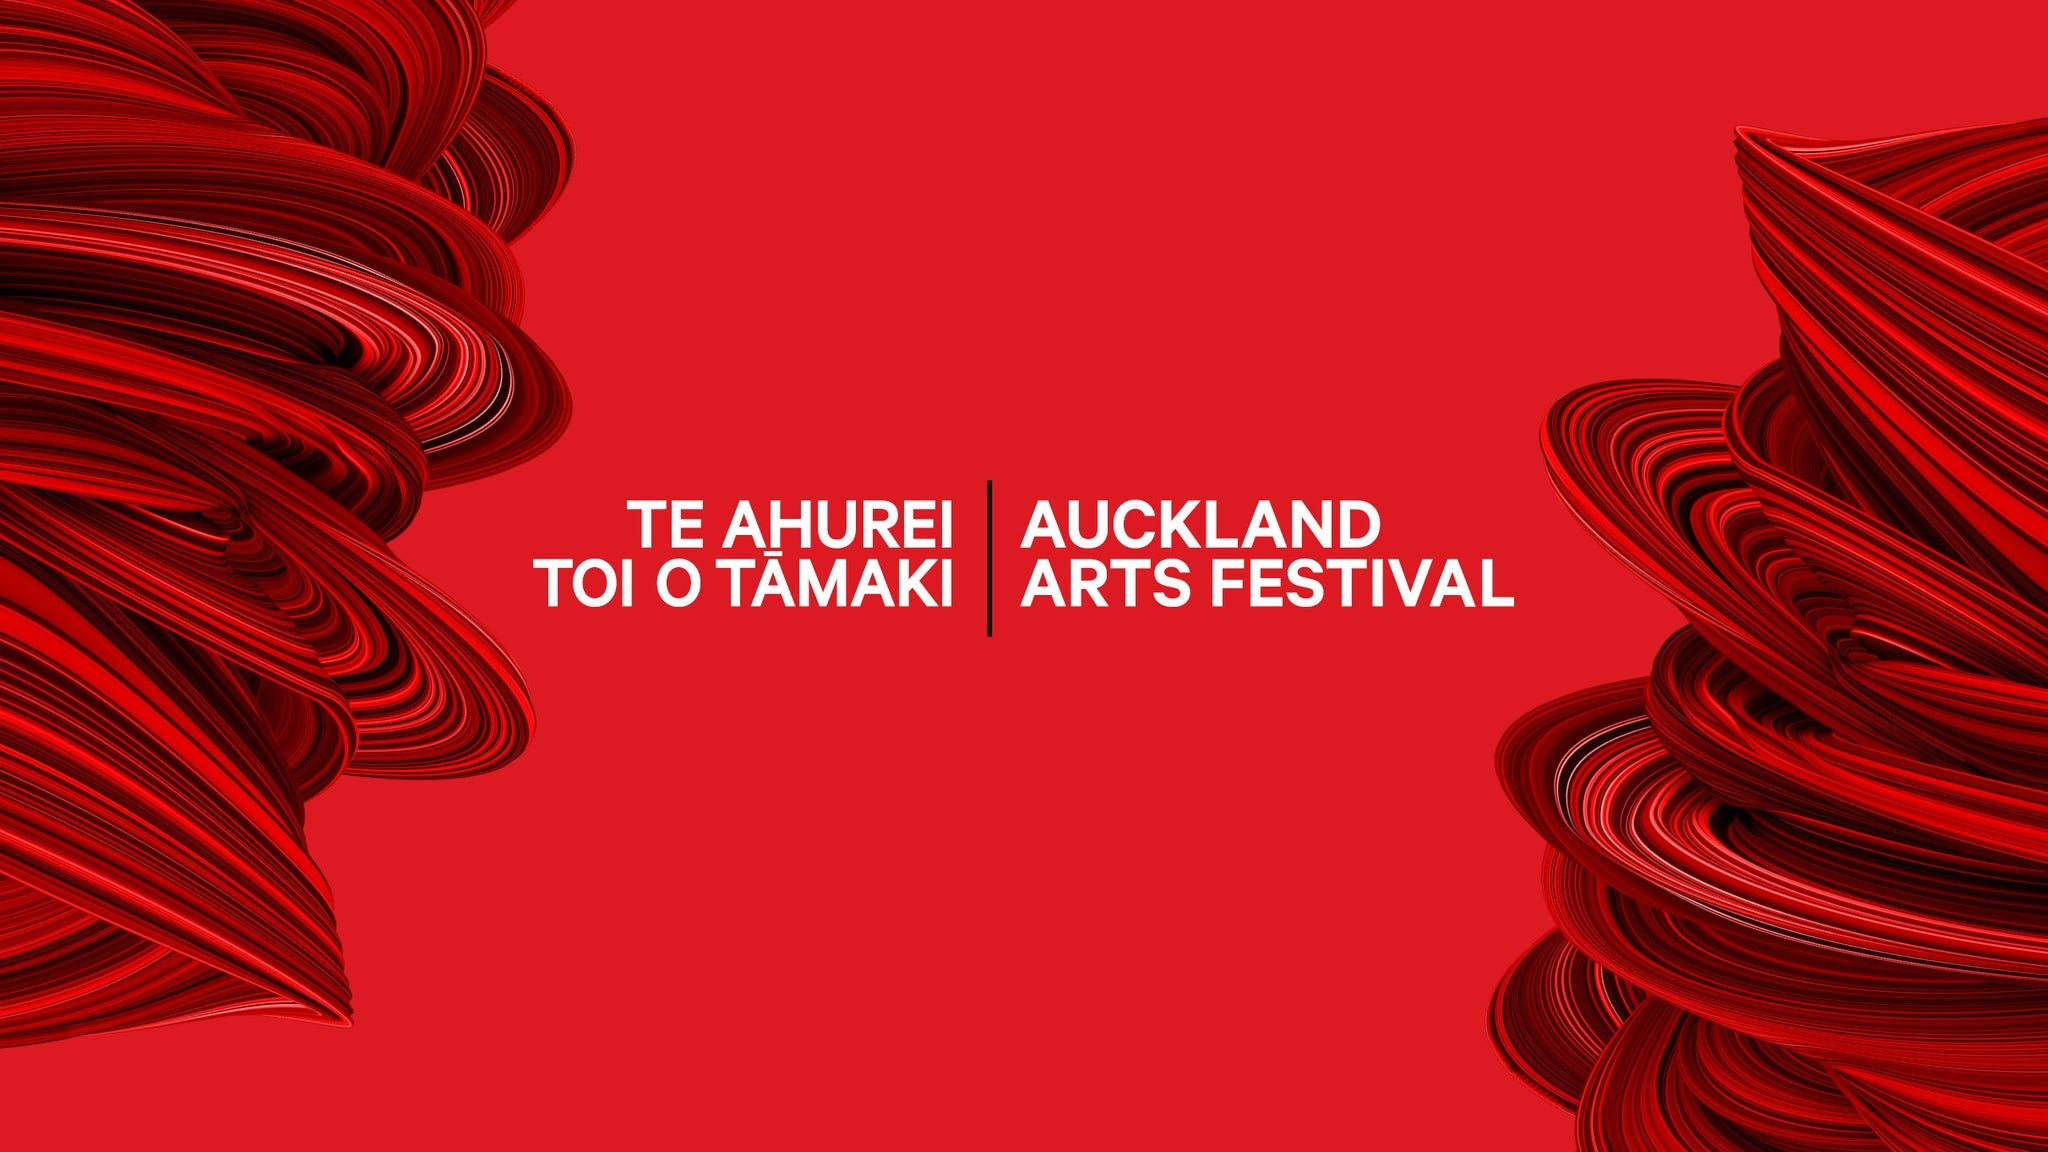 Image used with permission from Ticketmaster | AKLFEST: Manifesto tickets